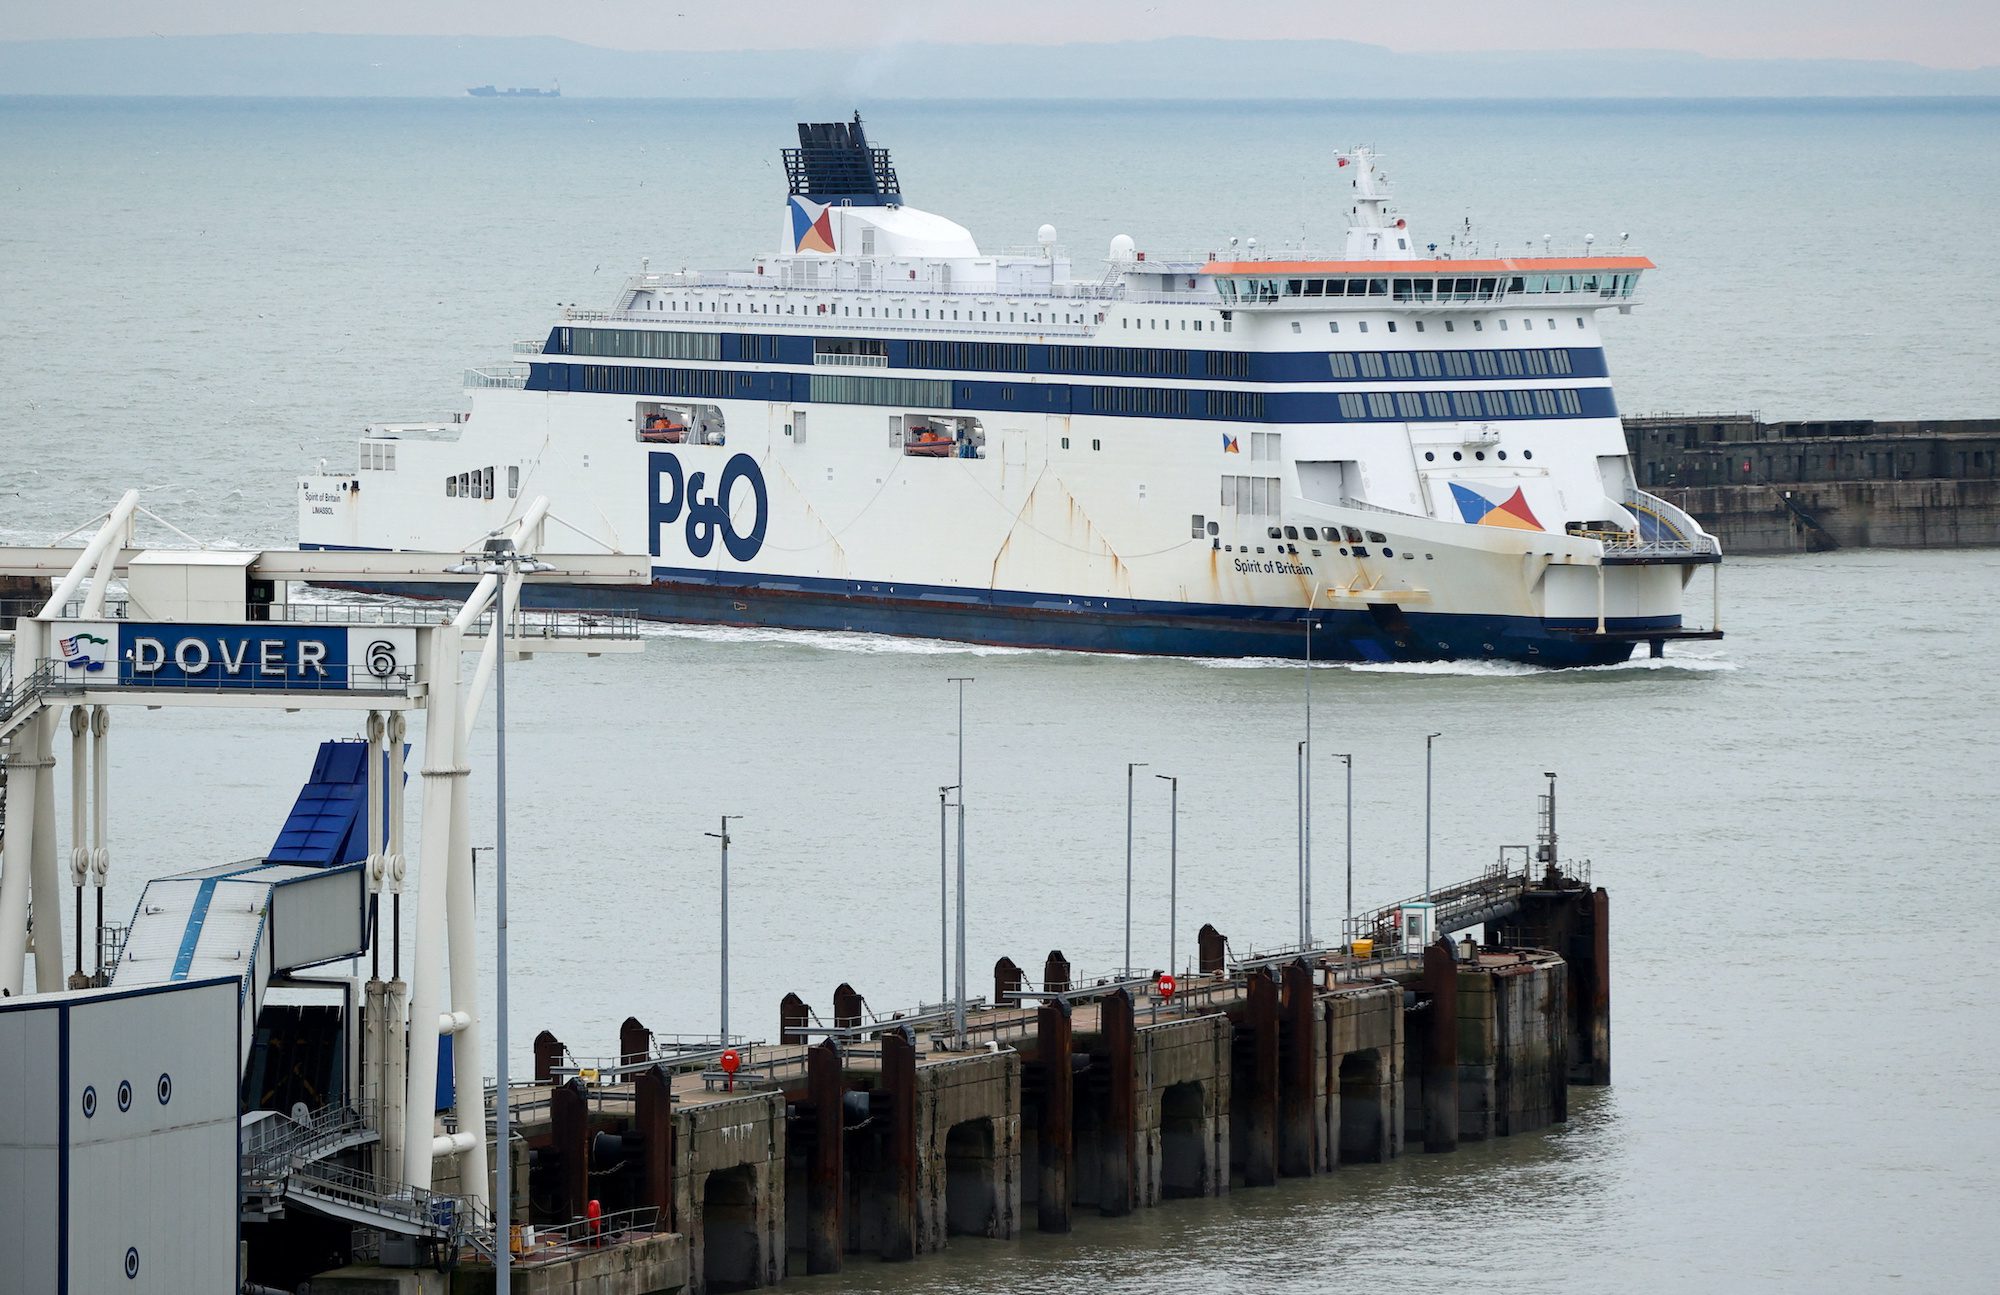 UK Launches Criminal and Civil Investigations Into P&O Ferries Over Firings